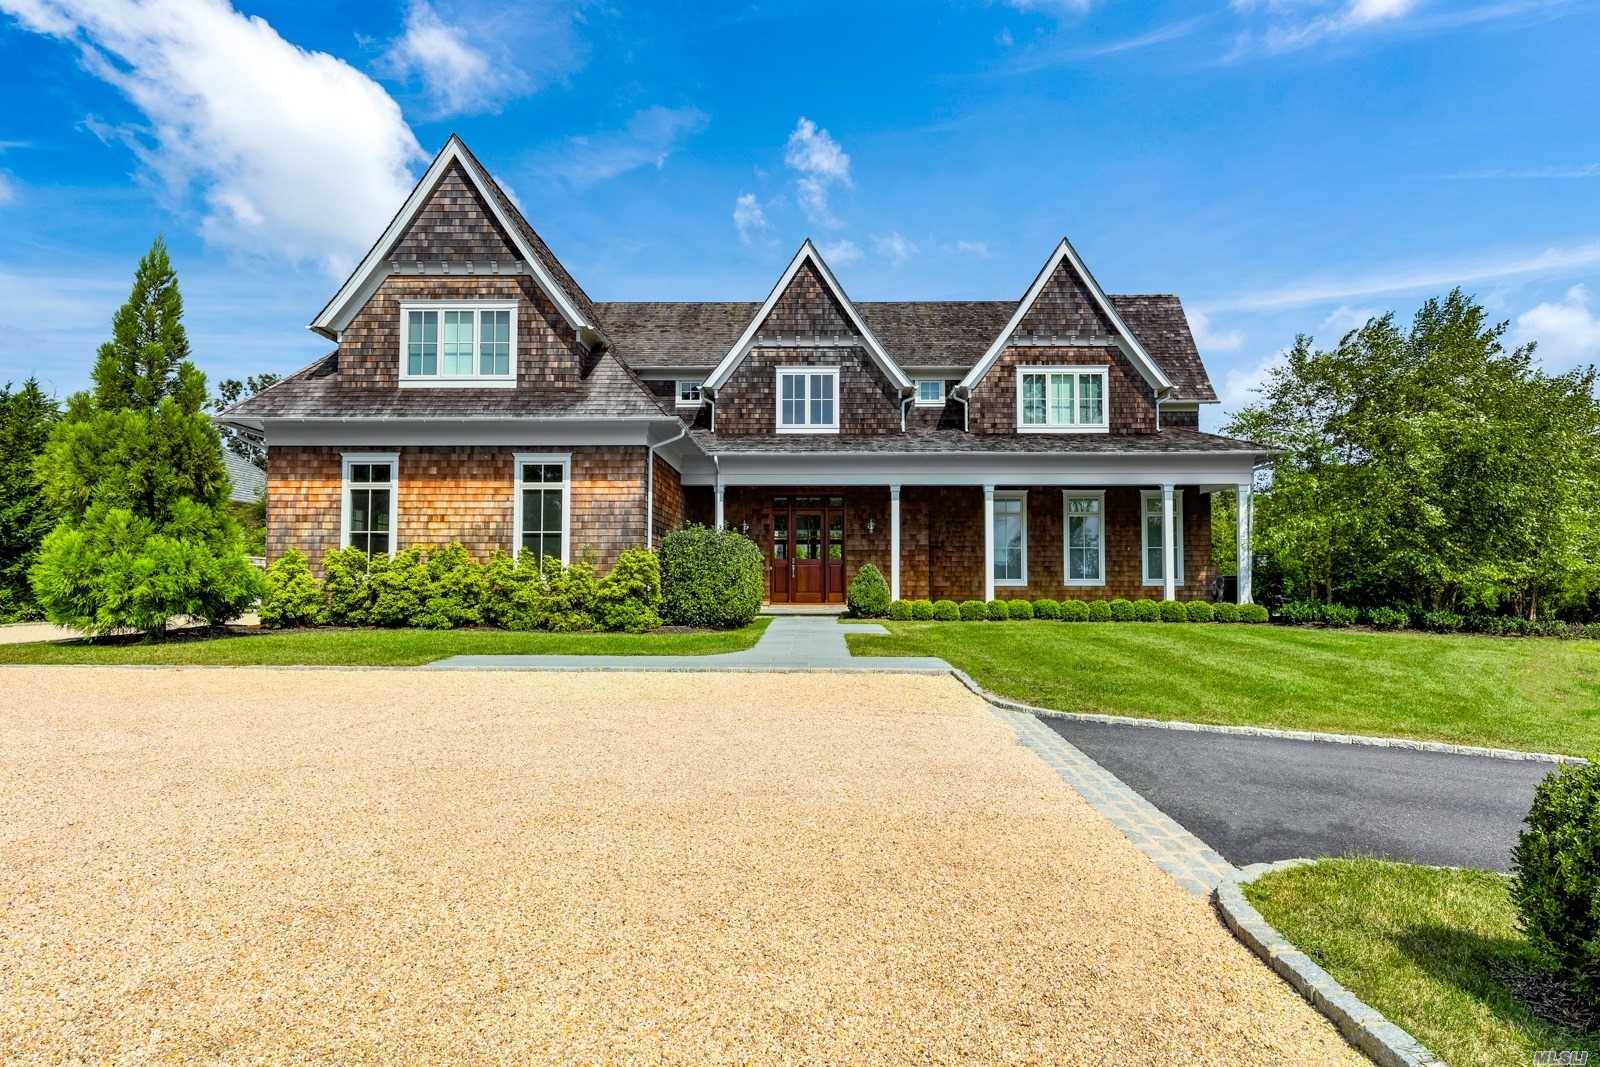 On a quiet lane in Bridgehampton discover this graceful, beautifully finished and appointed turnkey traditional that's well suited to entertaining or relaxing and unwinding.